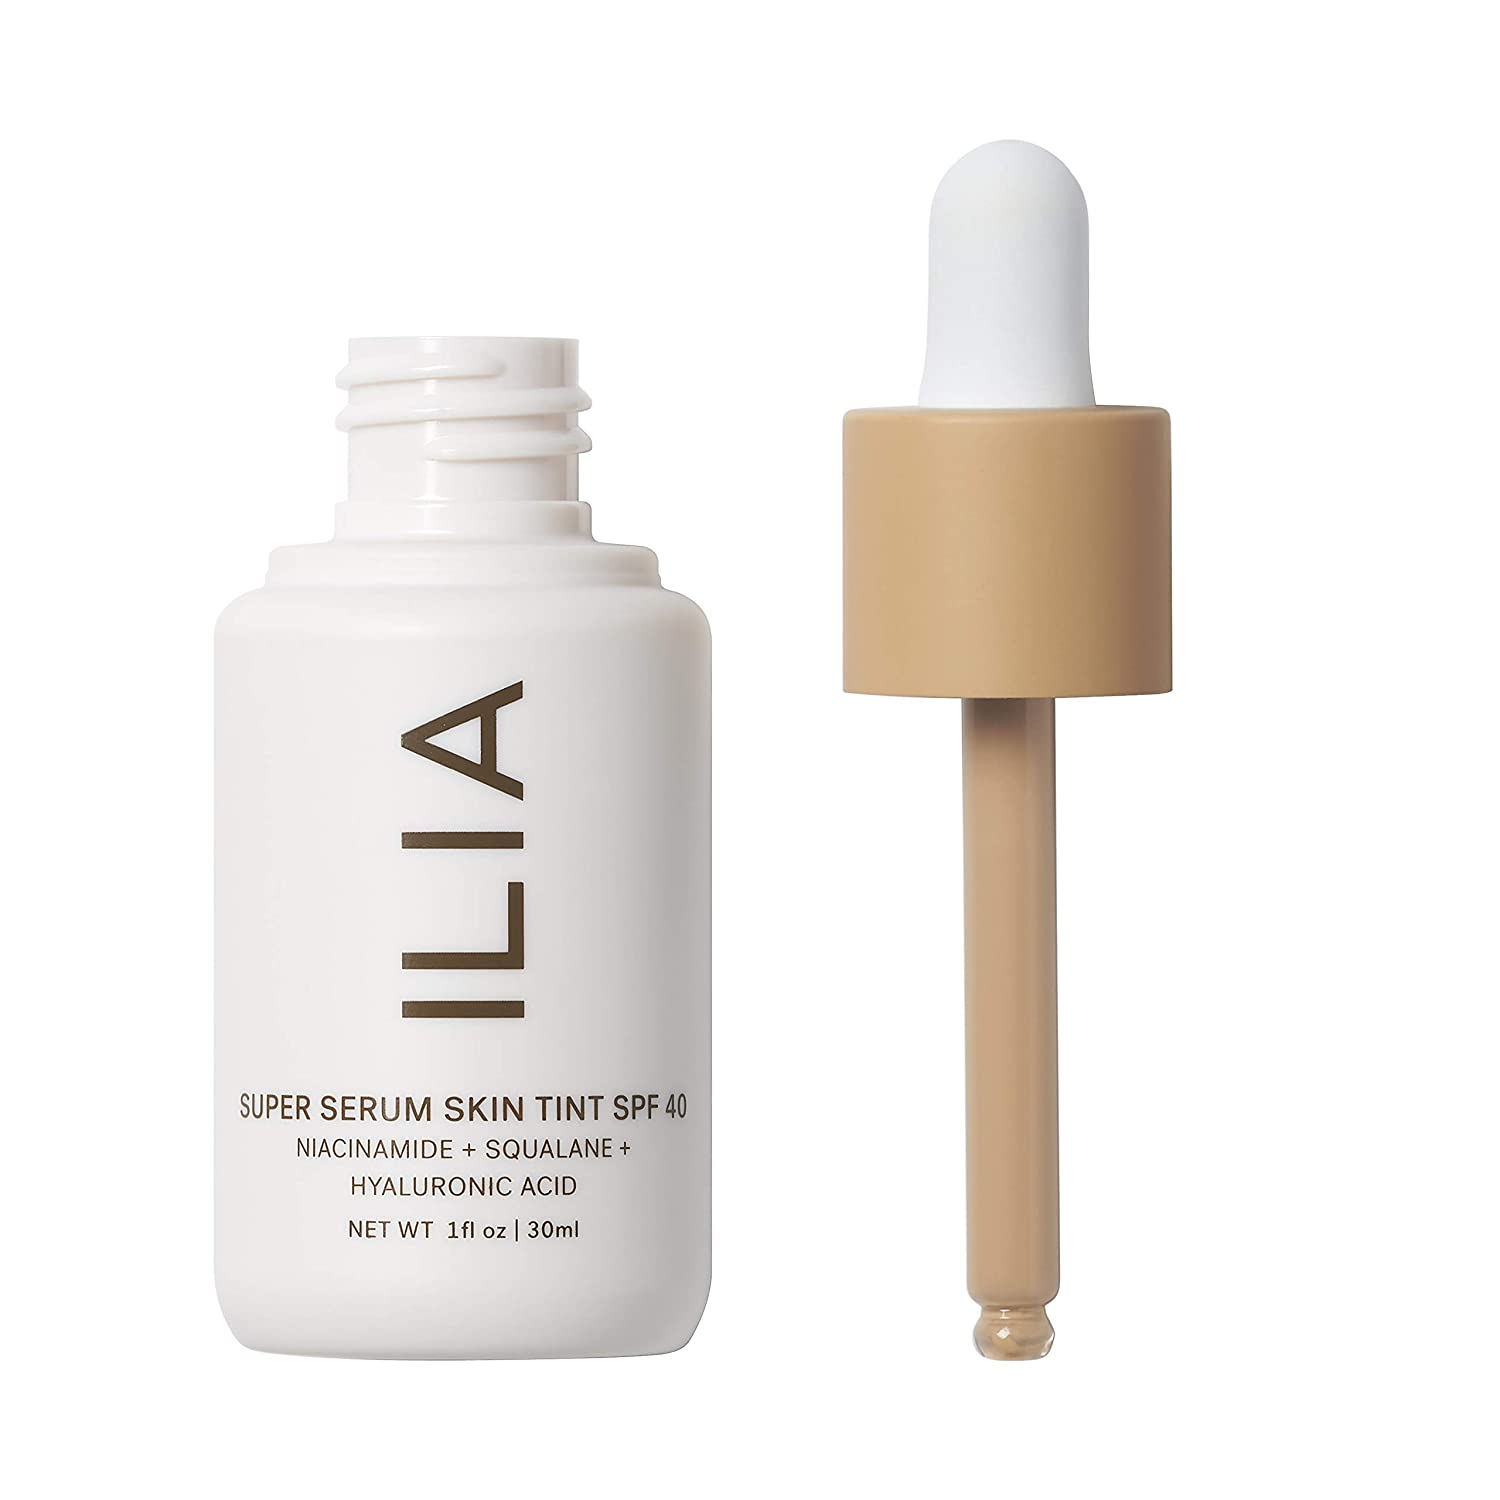 ILIA - Super Serum Skin Tint SPF 40 Serum With Light, Dewy Coverage, Mineral SPF, + Active Levels Of Skincare Ingredients